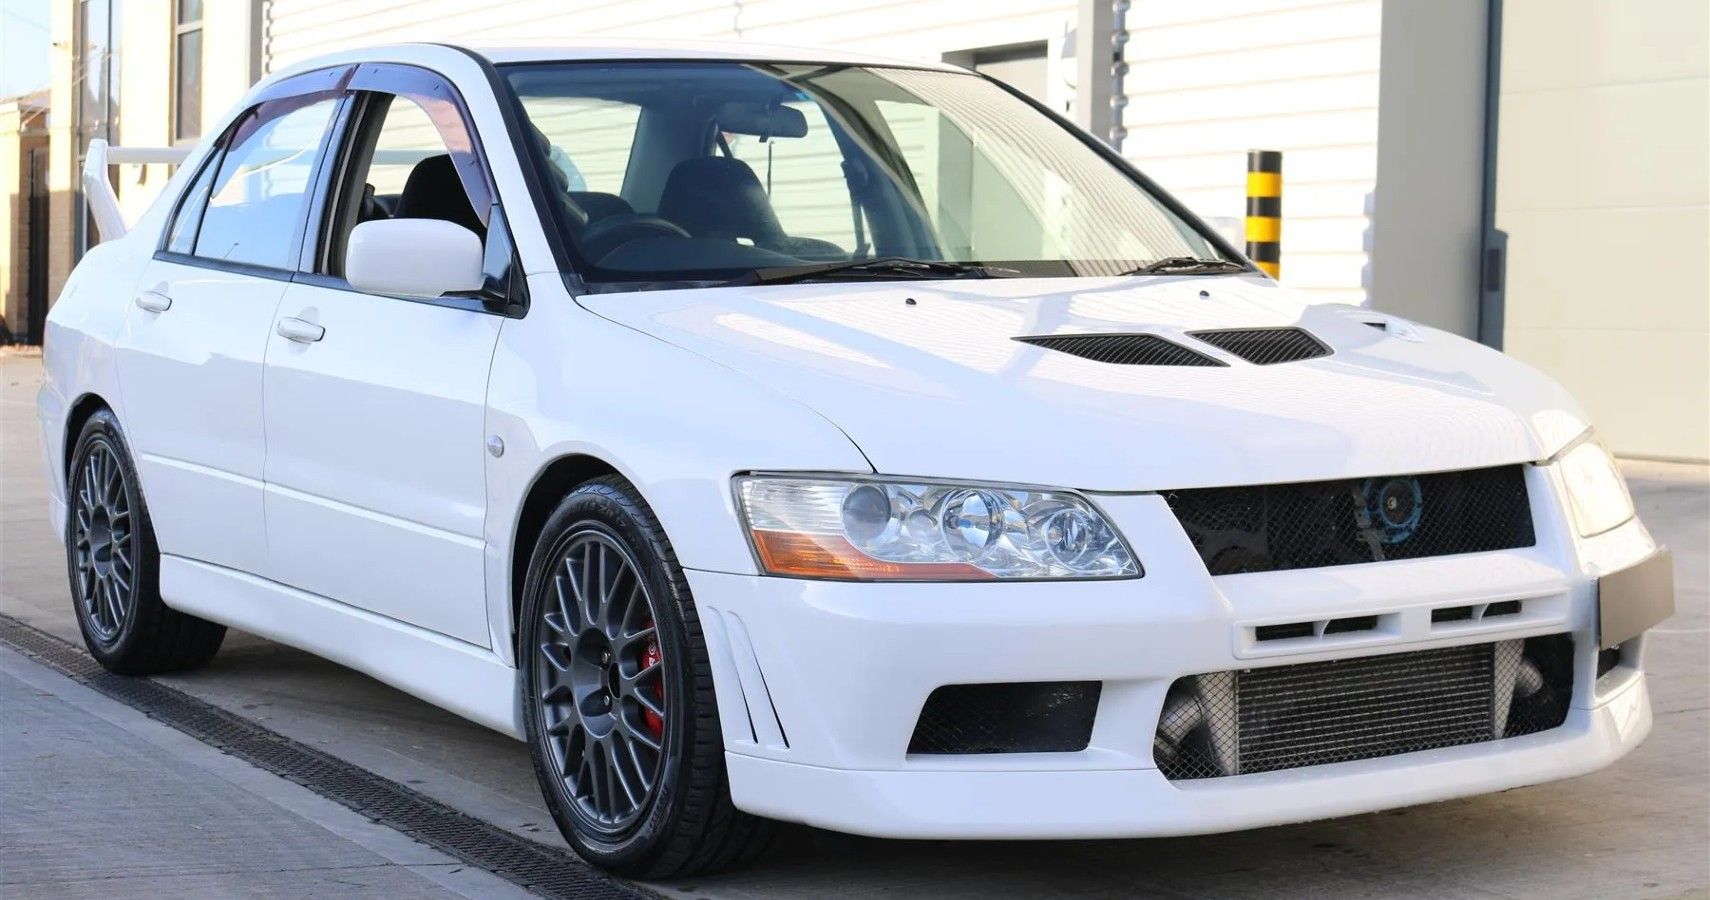 Here’s What Makes The 2001 Mitsubishi Lancer Evo VII Special